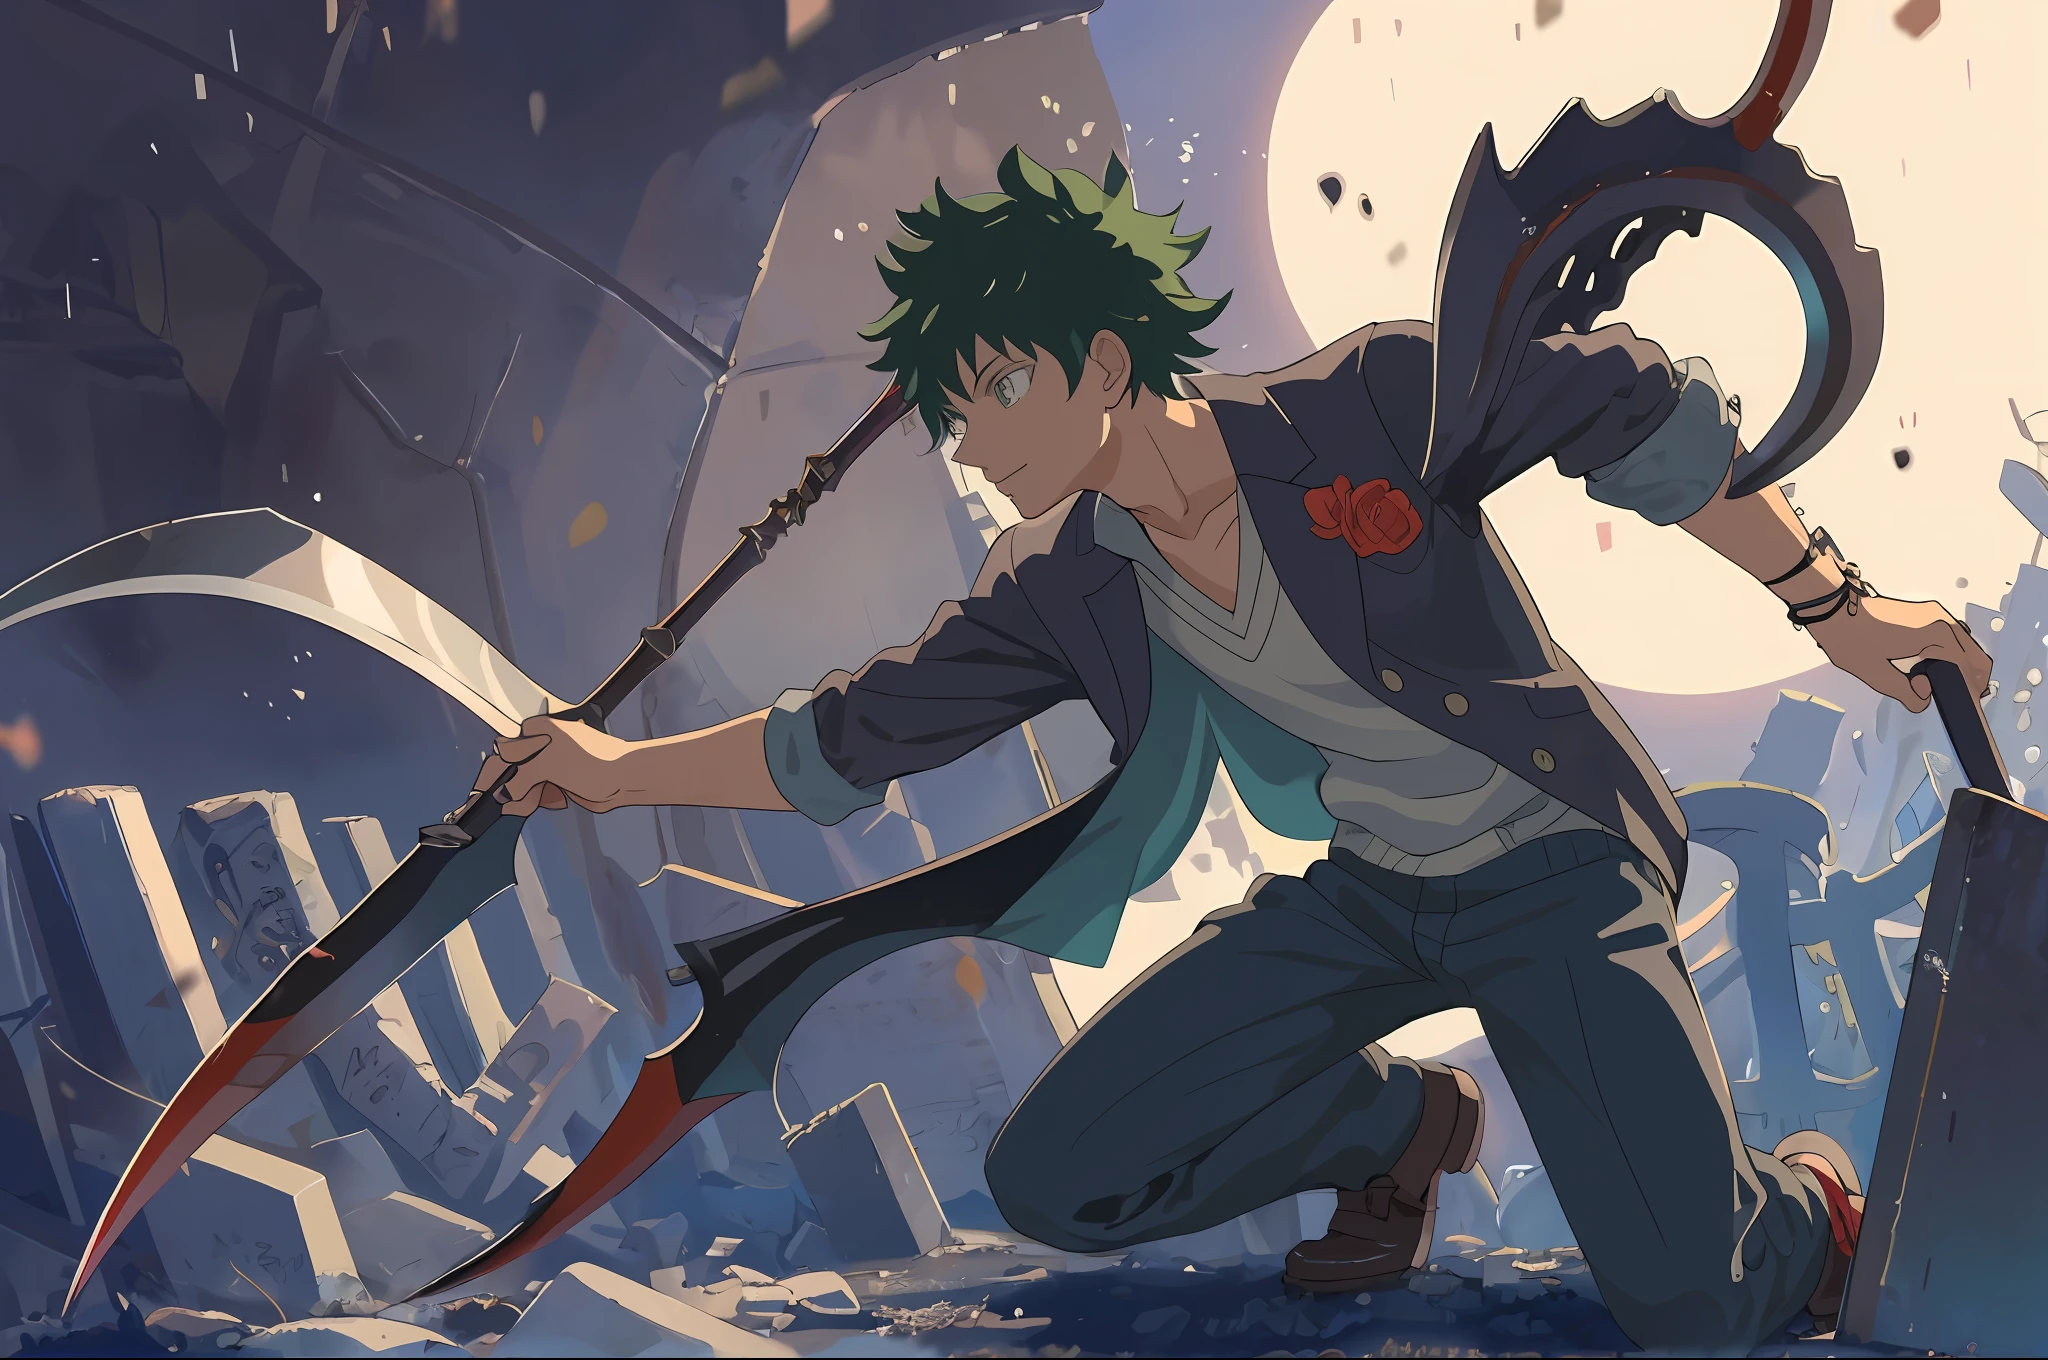 " IZUKU MIDORIYA as the Reaper Dressed in the garb of a plague doctor, wielding a scythe in a graveyard under the crimson moonlight.